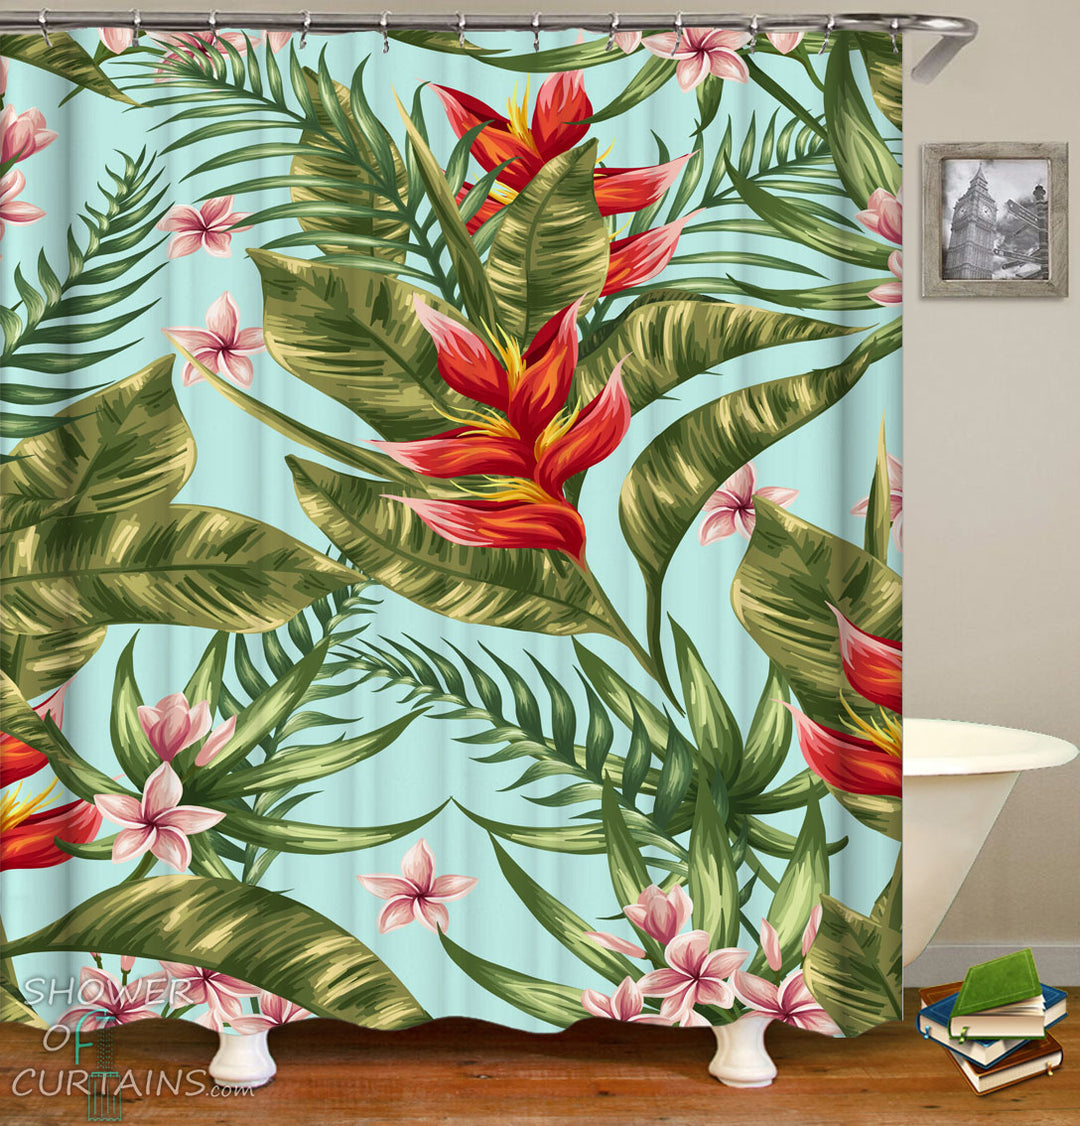 Tropical Shower Curtains of Tropical Red And Green With Plumerias (Frangipani) and Bird of Paradise